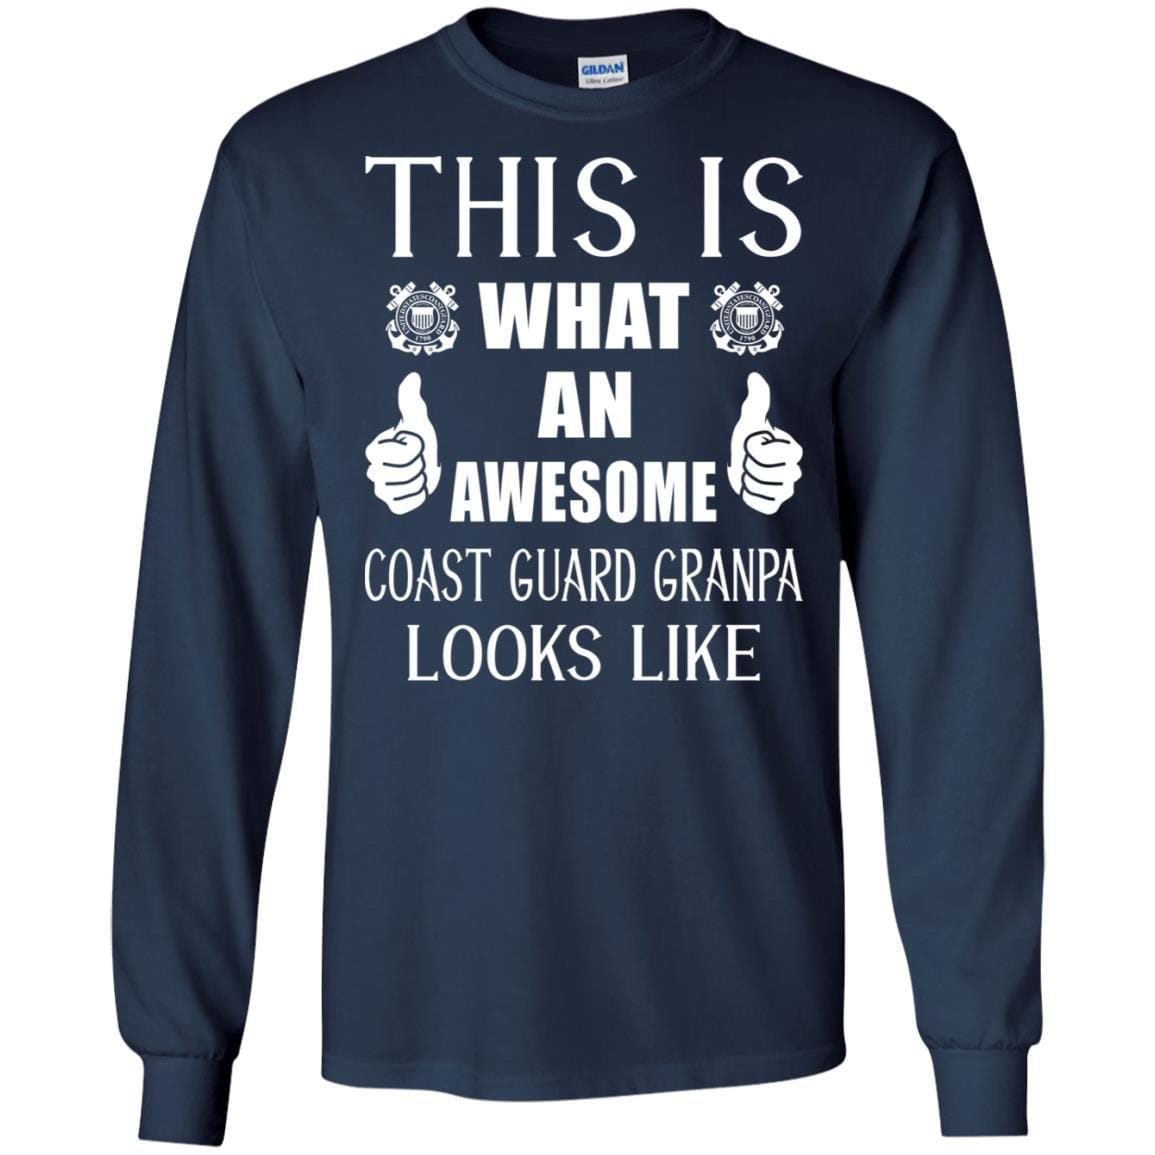 This Is What An Awesome Coast Guard Grandpa Look Like T-Shirt On Front-TShirt-USCG-Veterans Nation